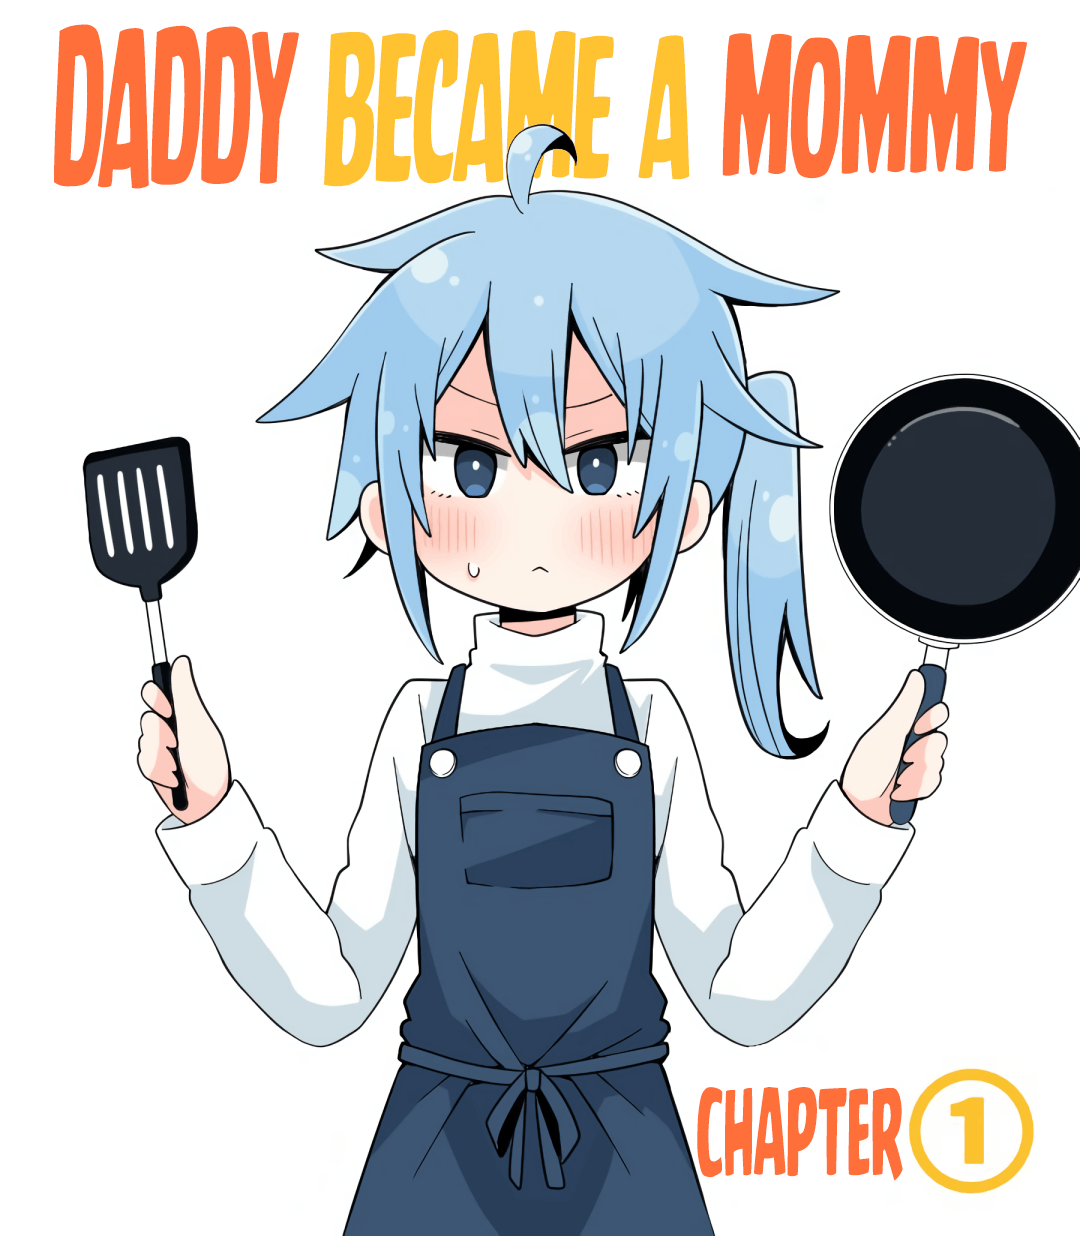 Daddy became a Mommy manga